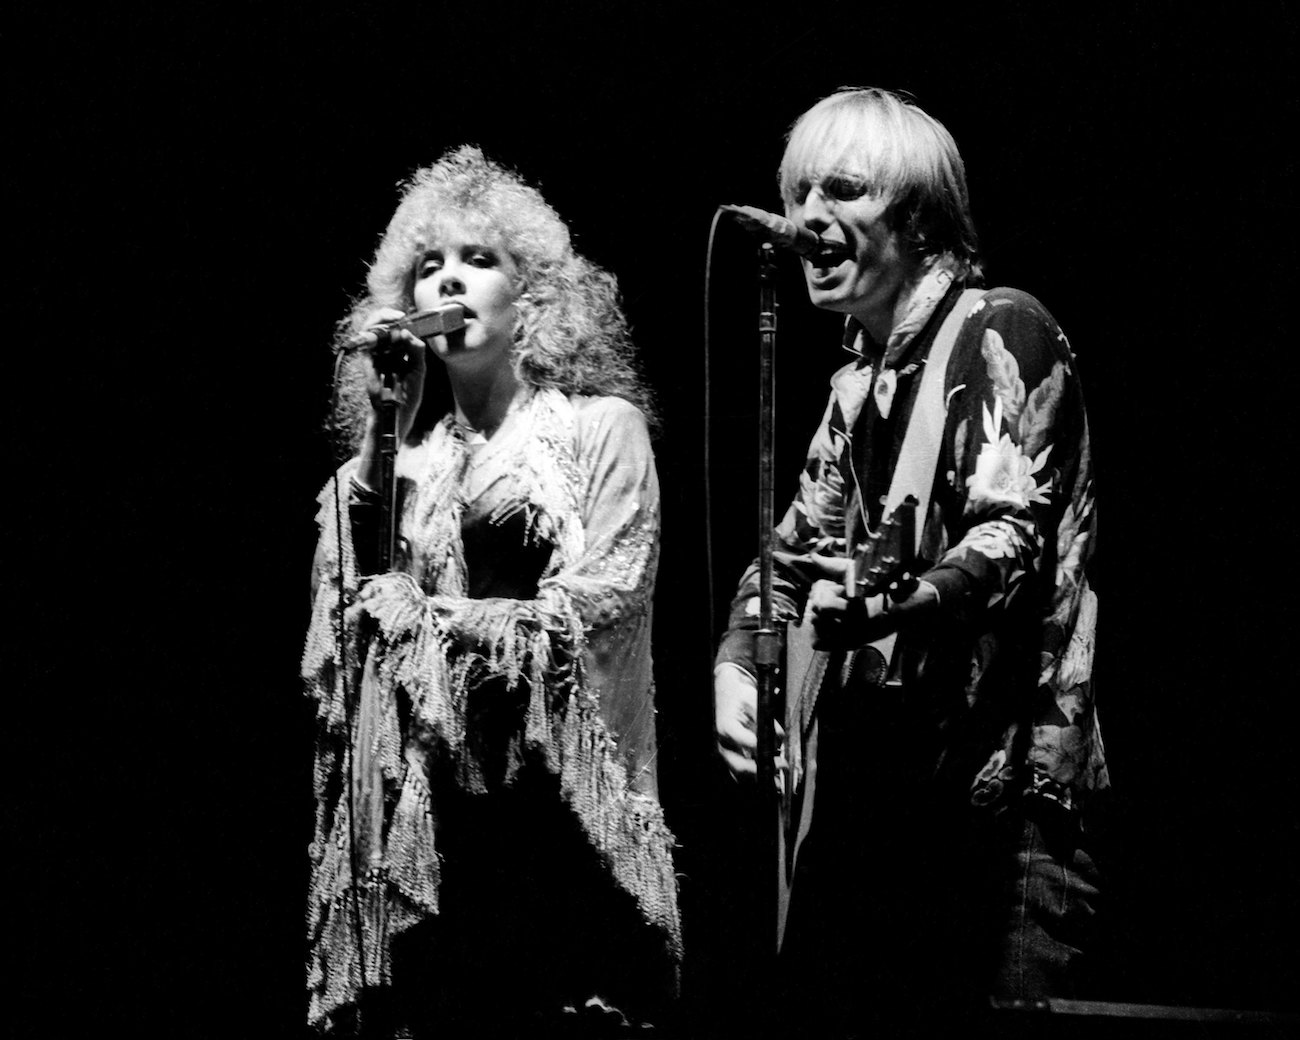 Stevie Nicks wearing a shawl while performing with Tom Petty at the Cow Palace in California, 1981.